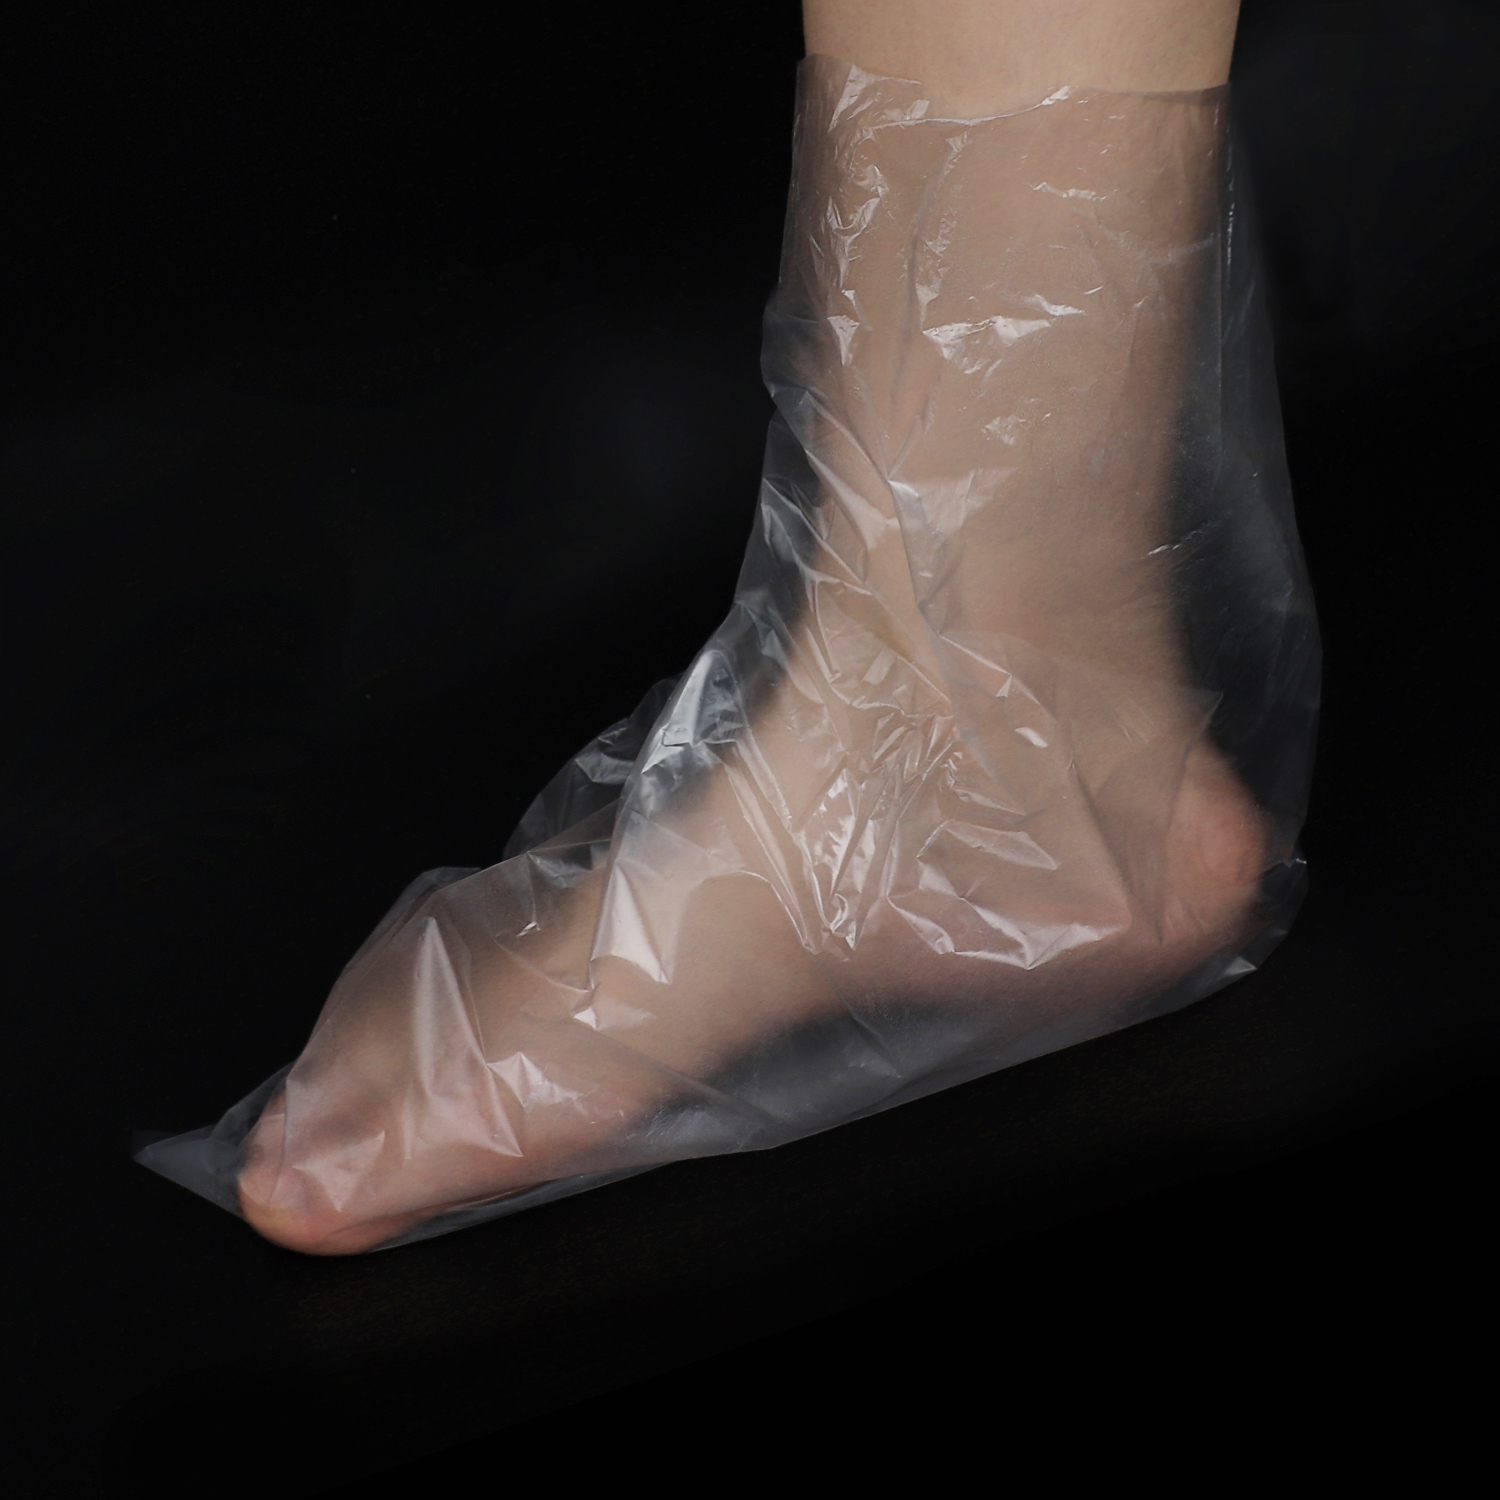 Paraffin Wax Liners for Hands Feet